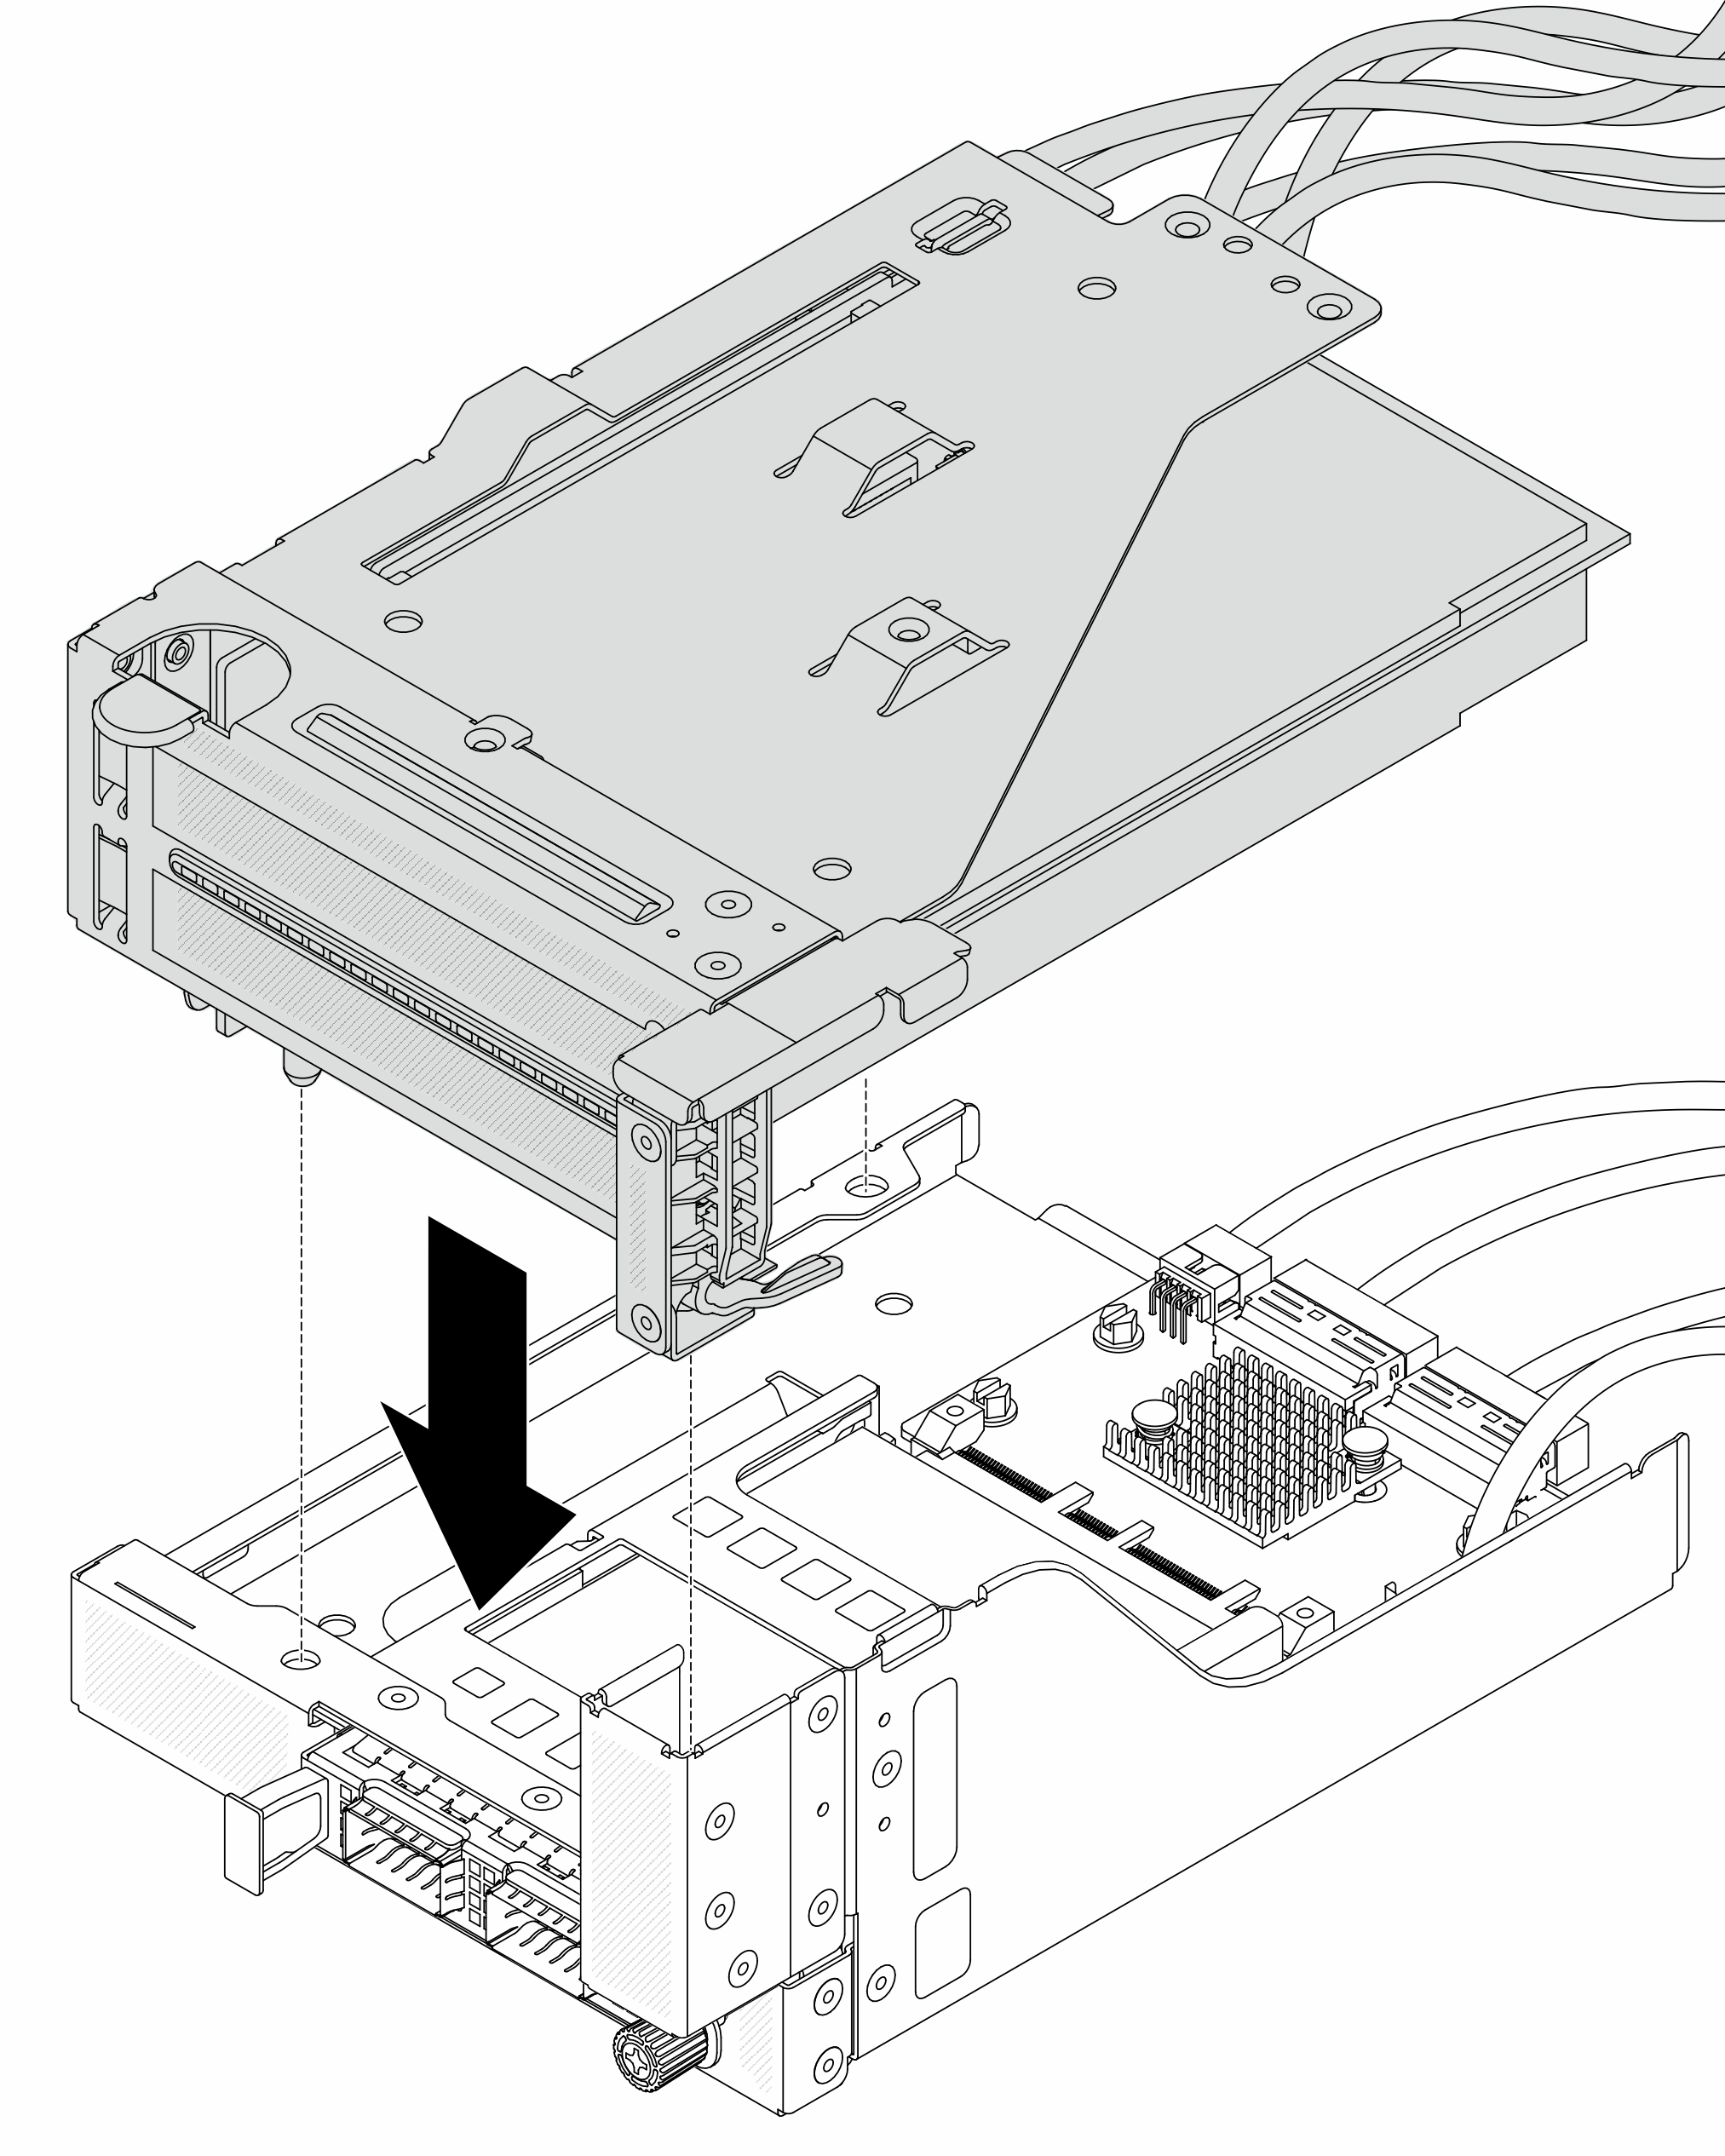 Install the riser 5 assembly on the front OCP assembly